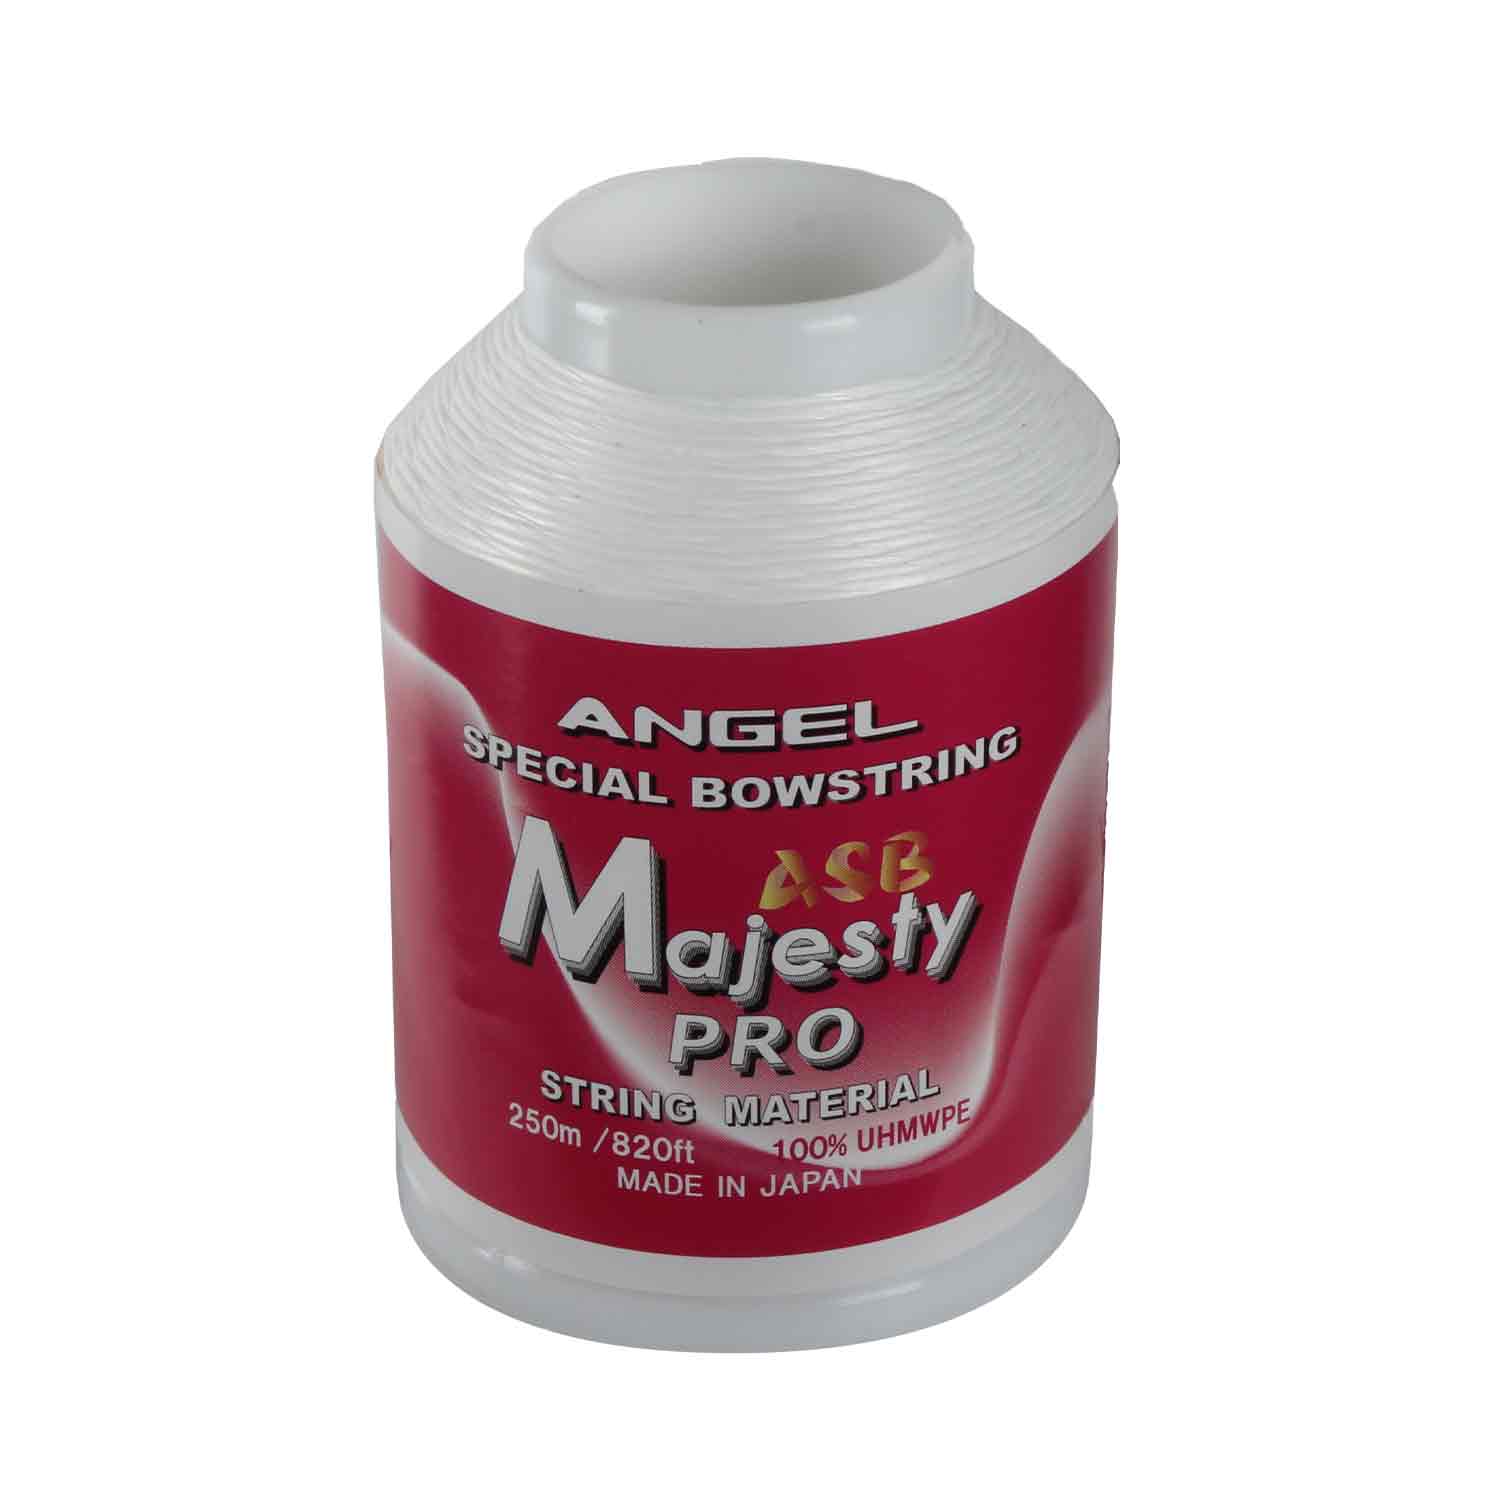 Angel Majesty Pro String Material